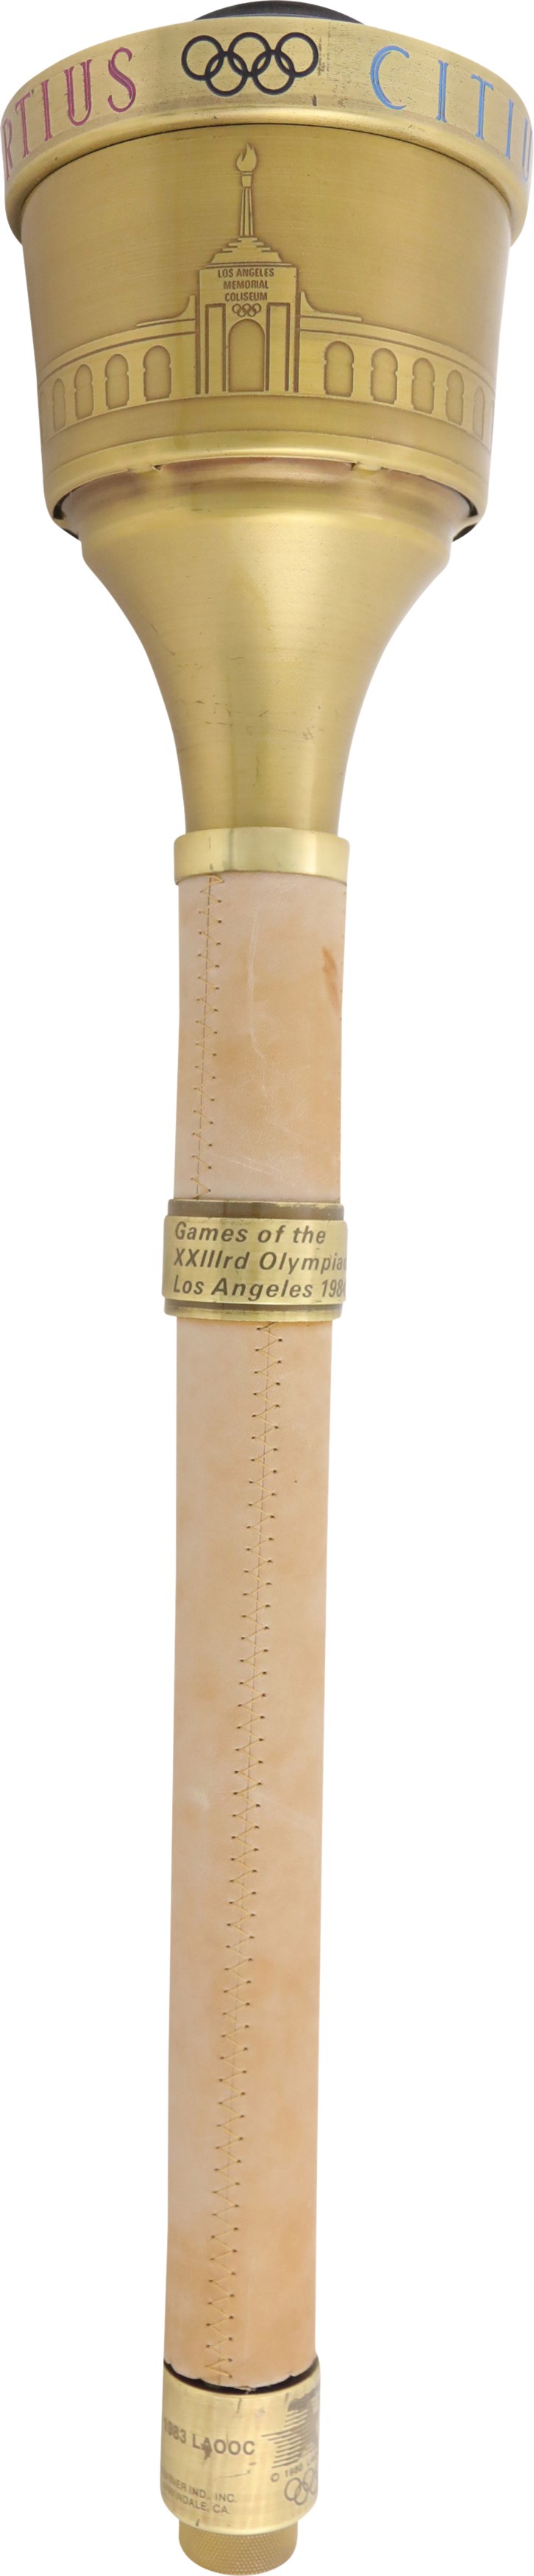 - 1984 Los Angeles Olympics Summer Games Relay Torch